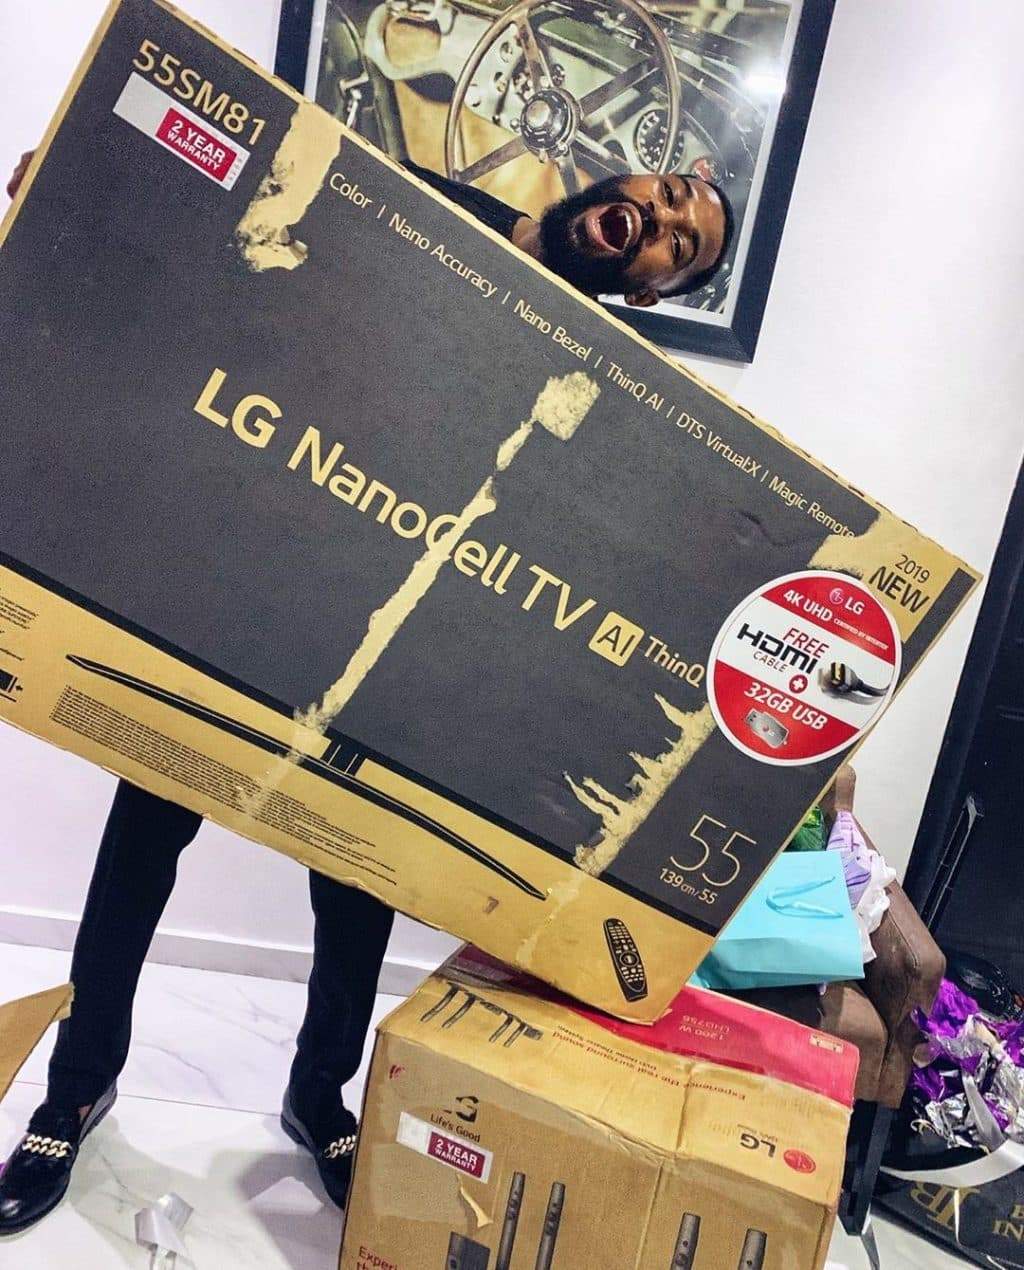 Mike receives loads of gifts at his 'meet and greet' party in Lekki